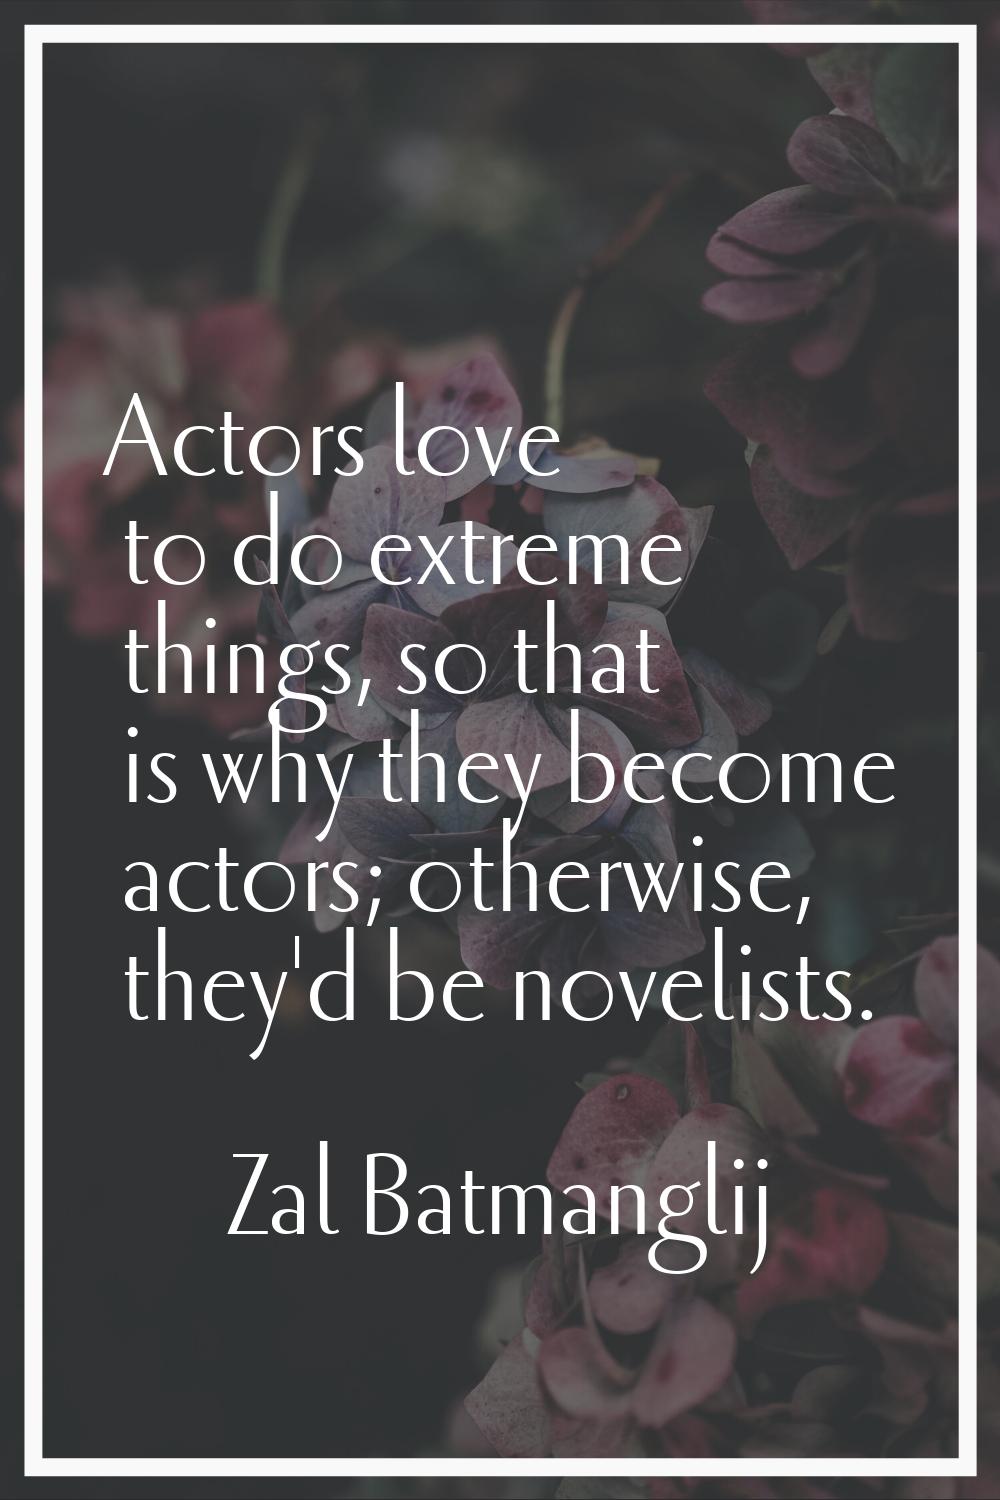 Actors love to do extreme things, so that is why they become actors; otherwise, they'd be novelists